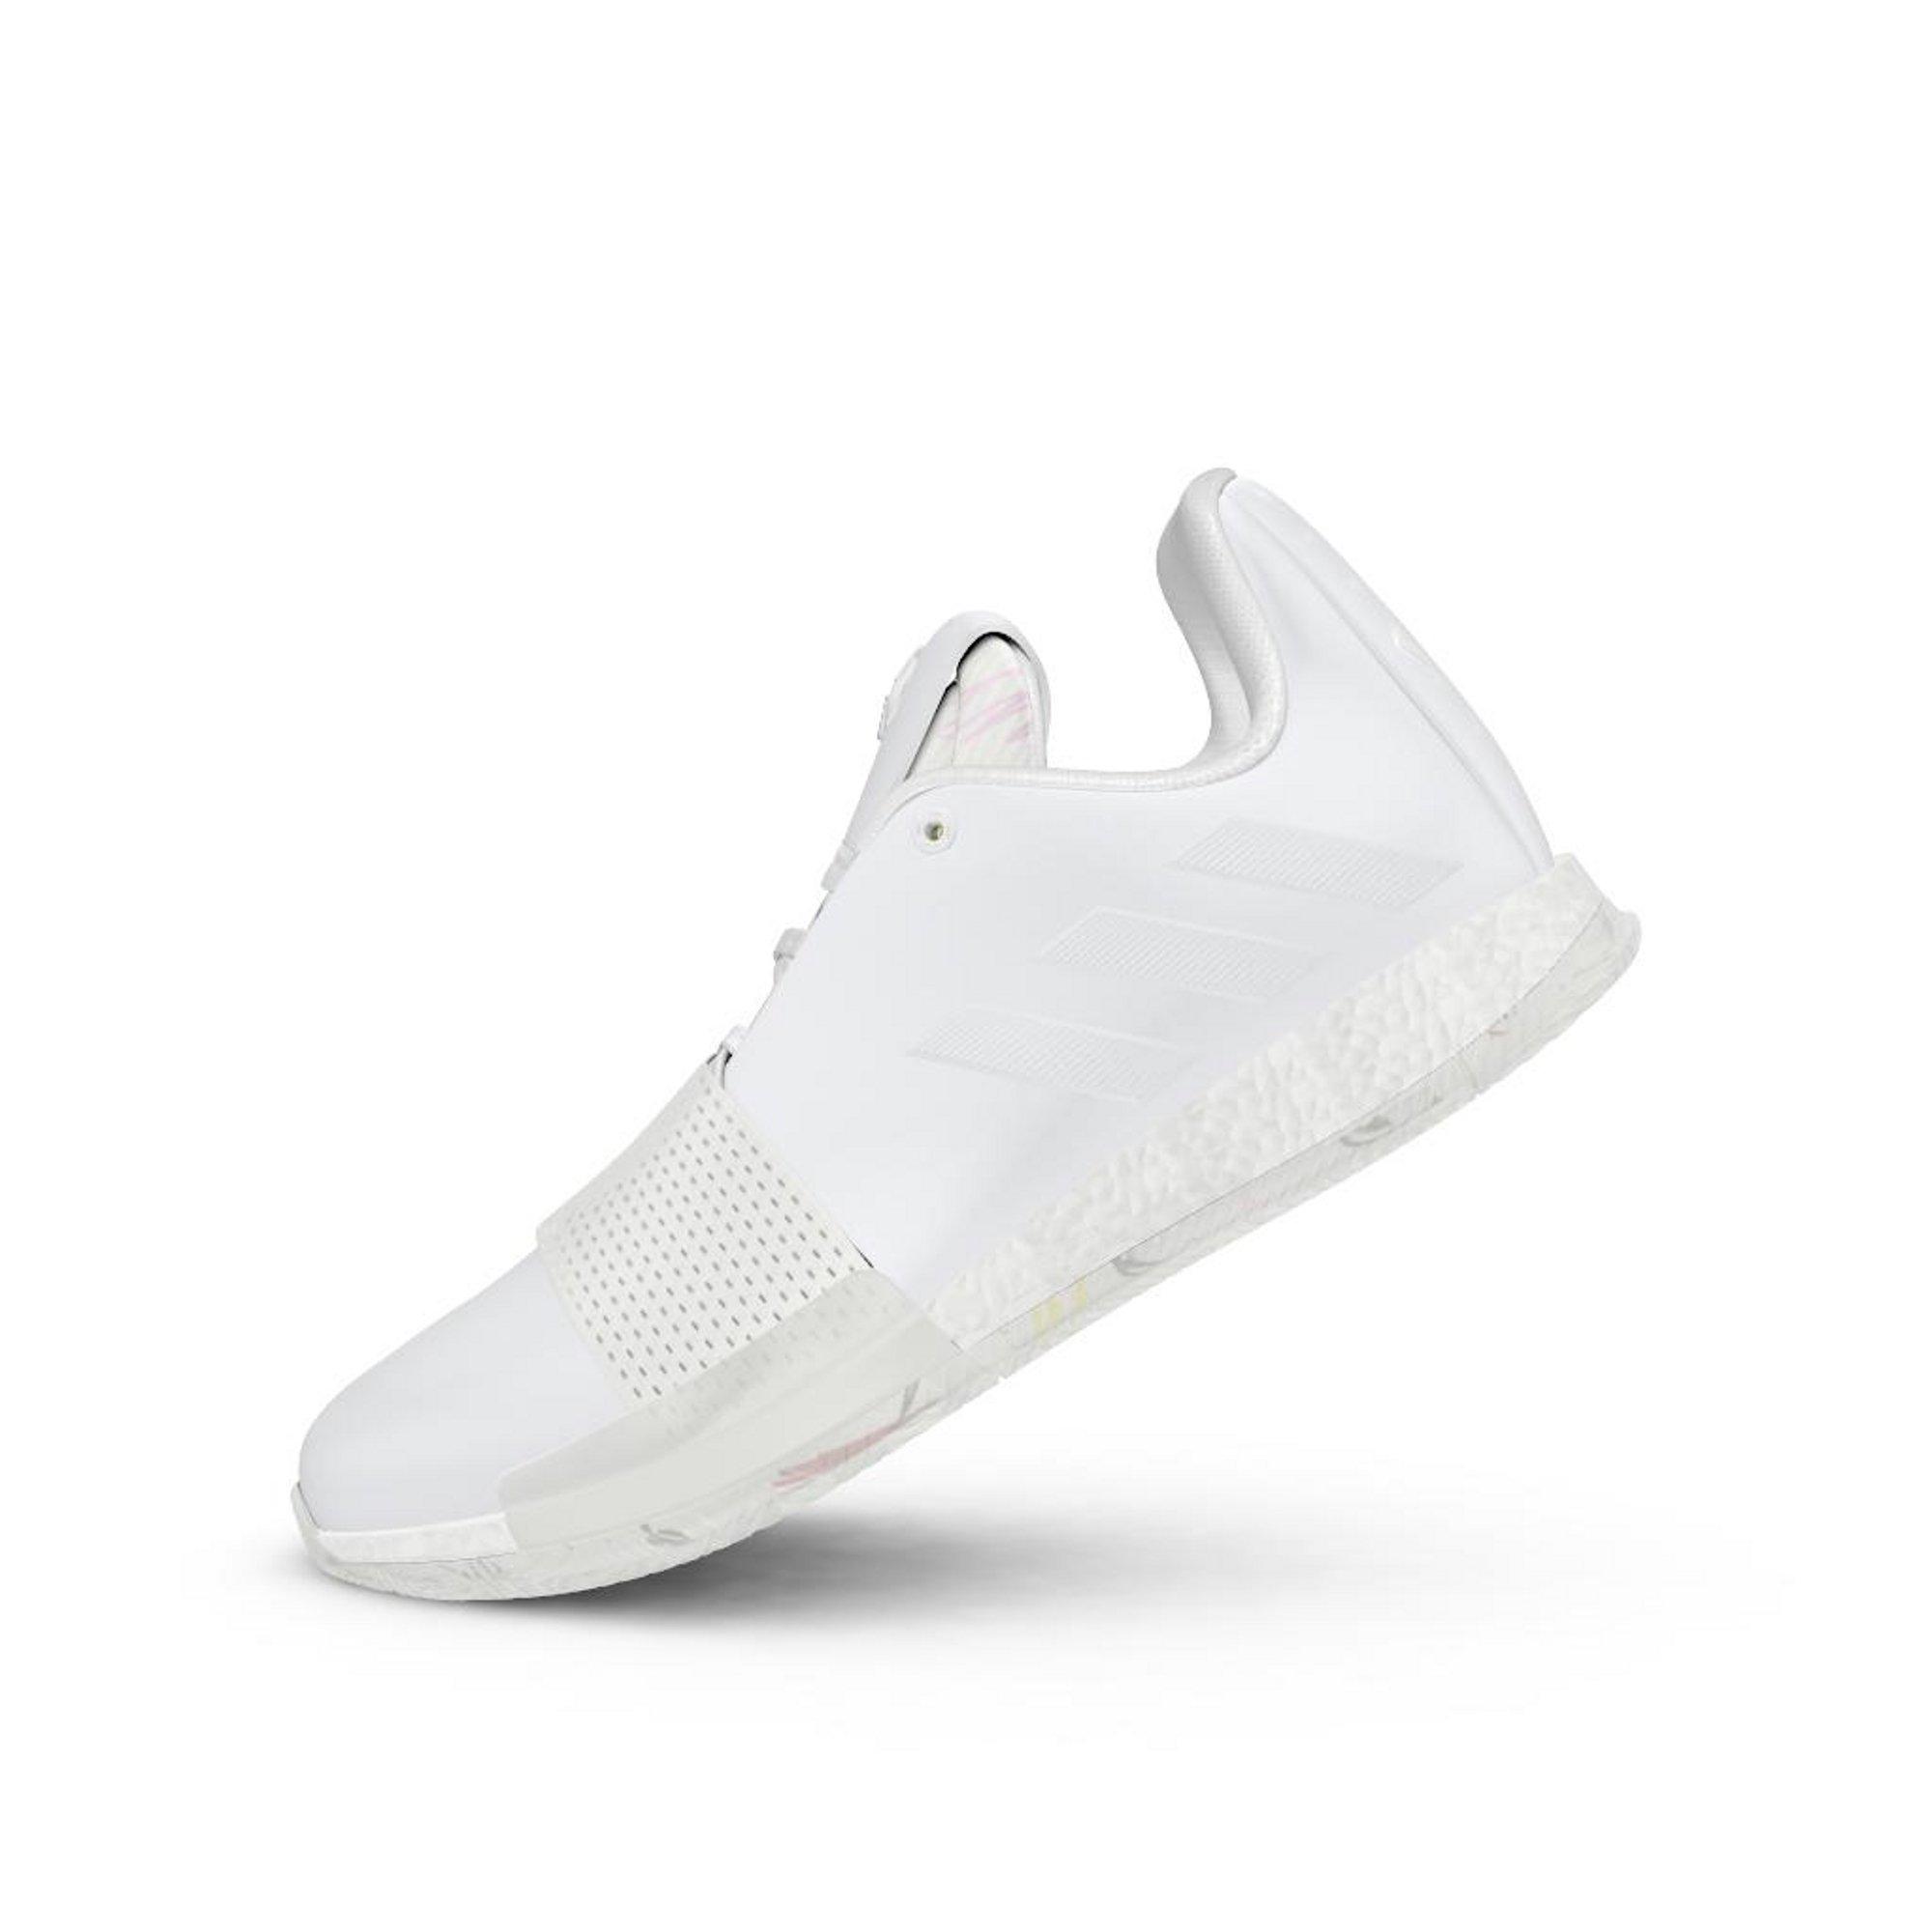 harden 3 all white Shop Clothing 